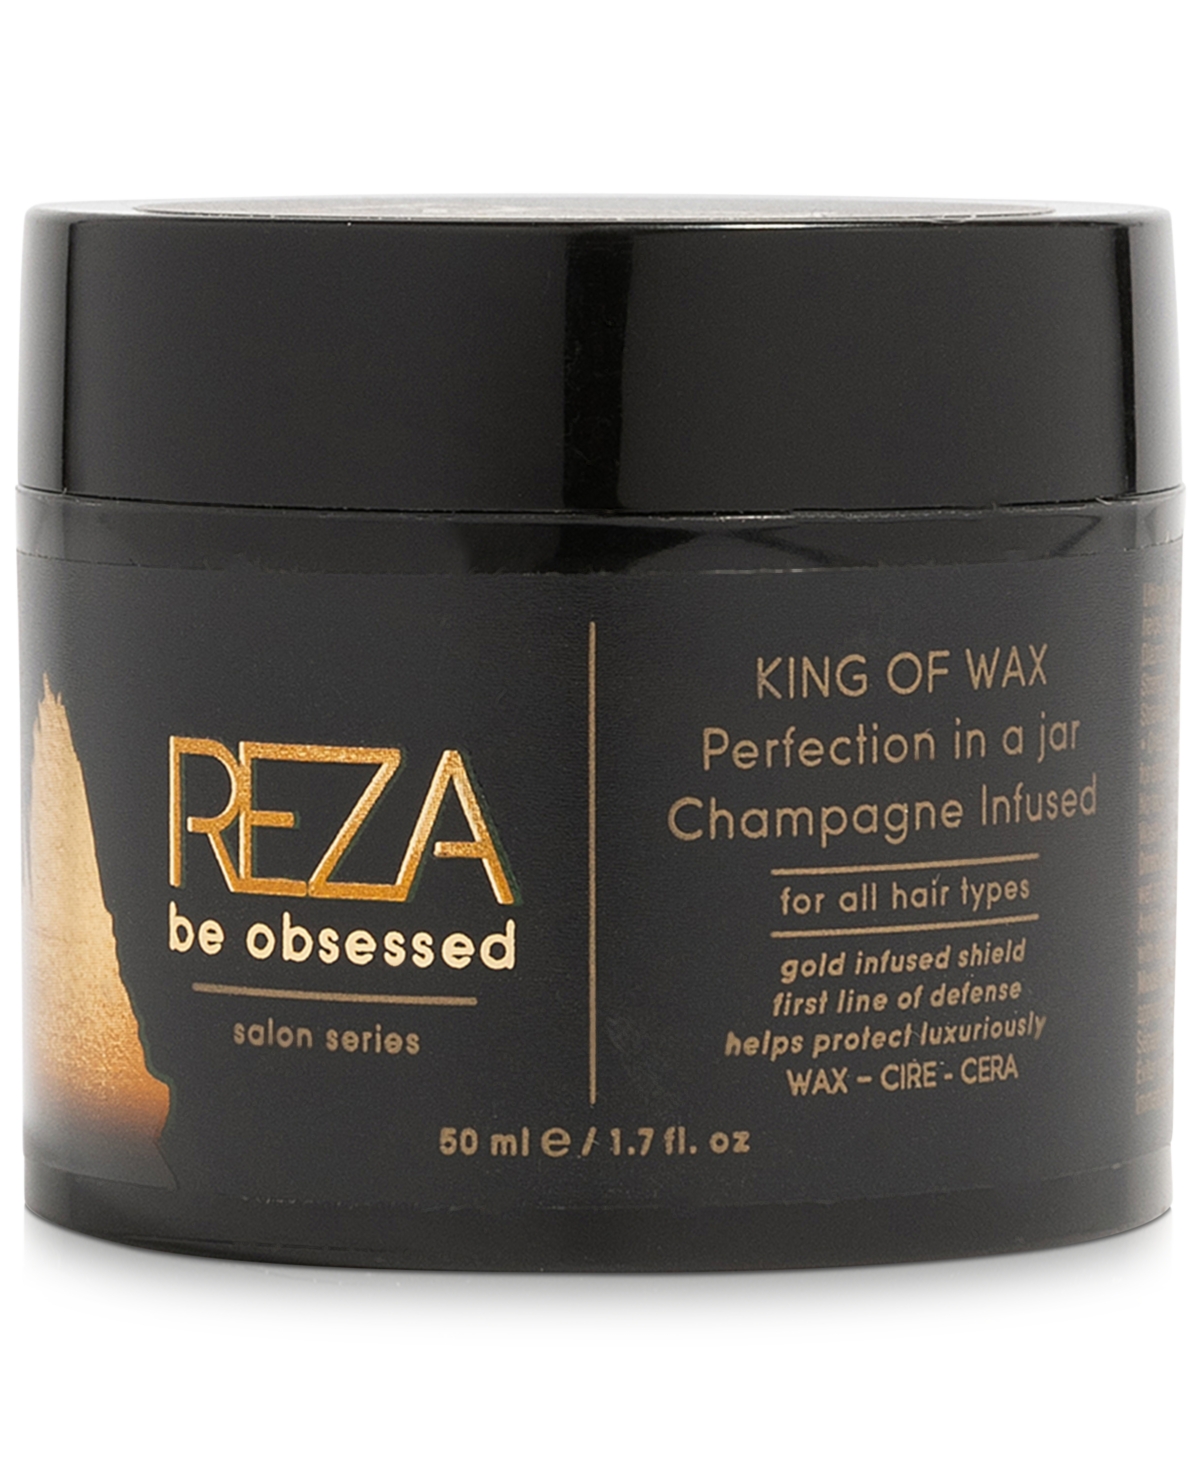 Be Obsessed King Of Wax, 1.7 oz.